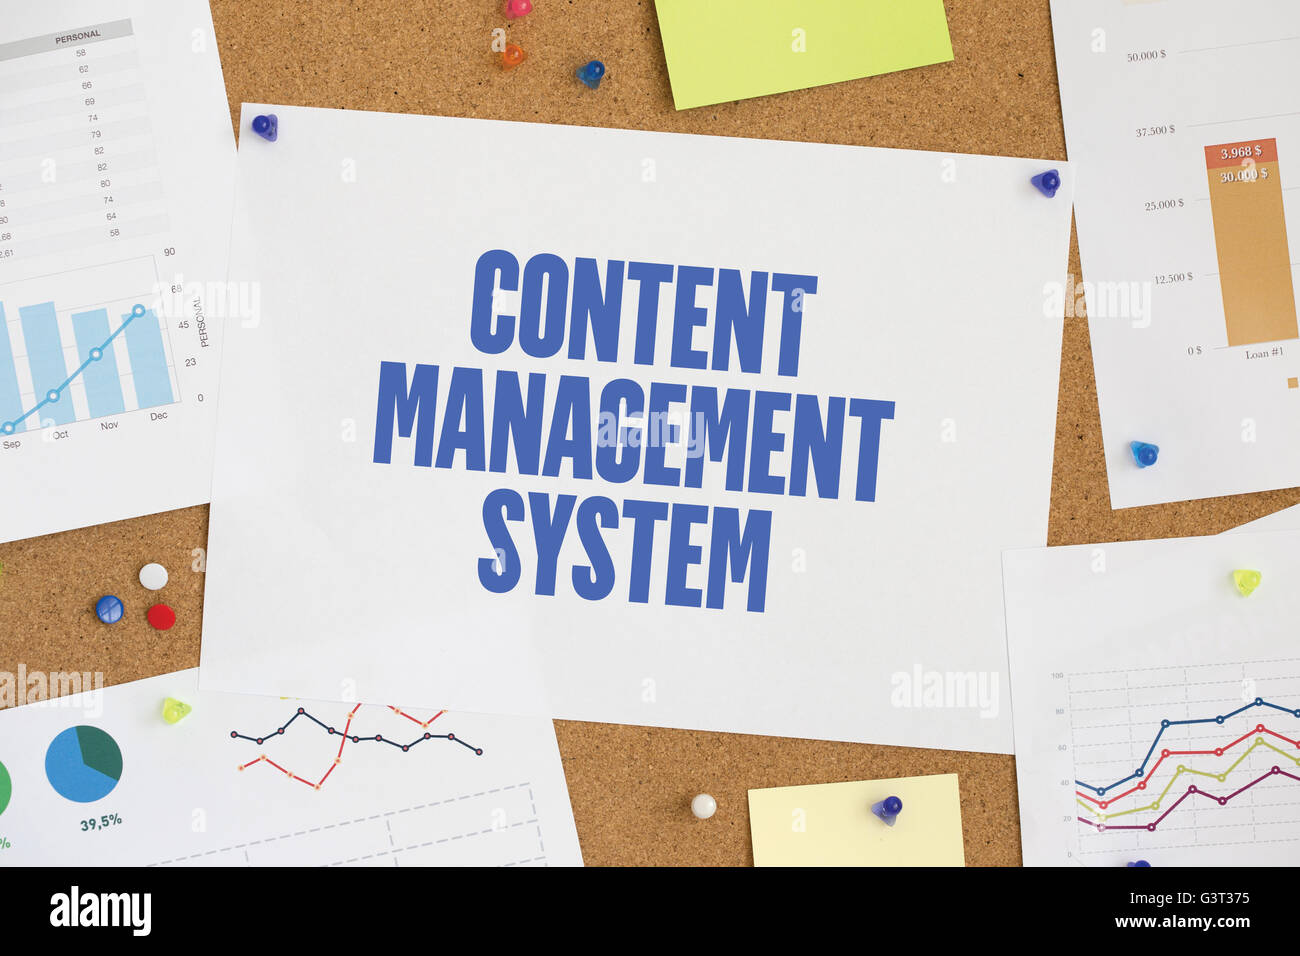 Charts and Graphs Showing the Results with CONTENT MANAGEMENT SYSTEM word written paper on corkboard Stock Photo